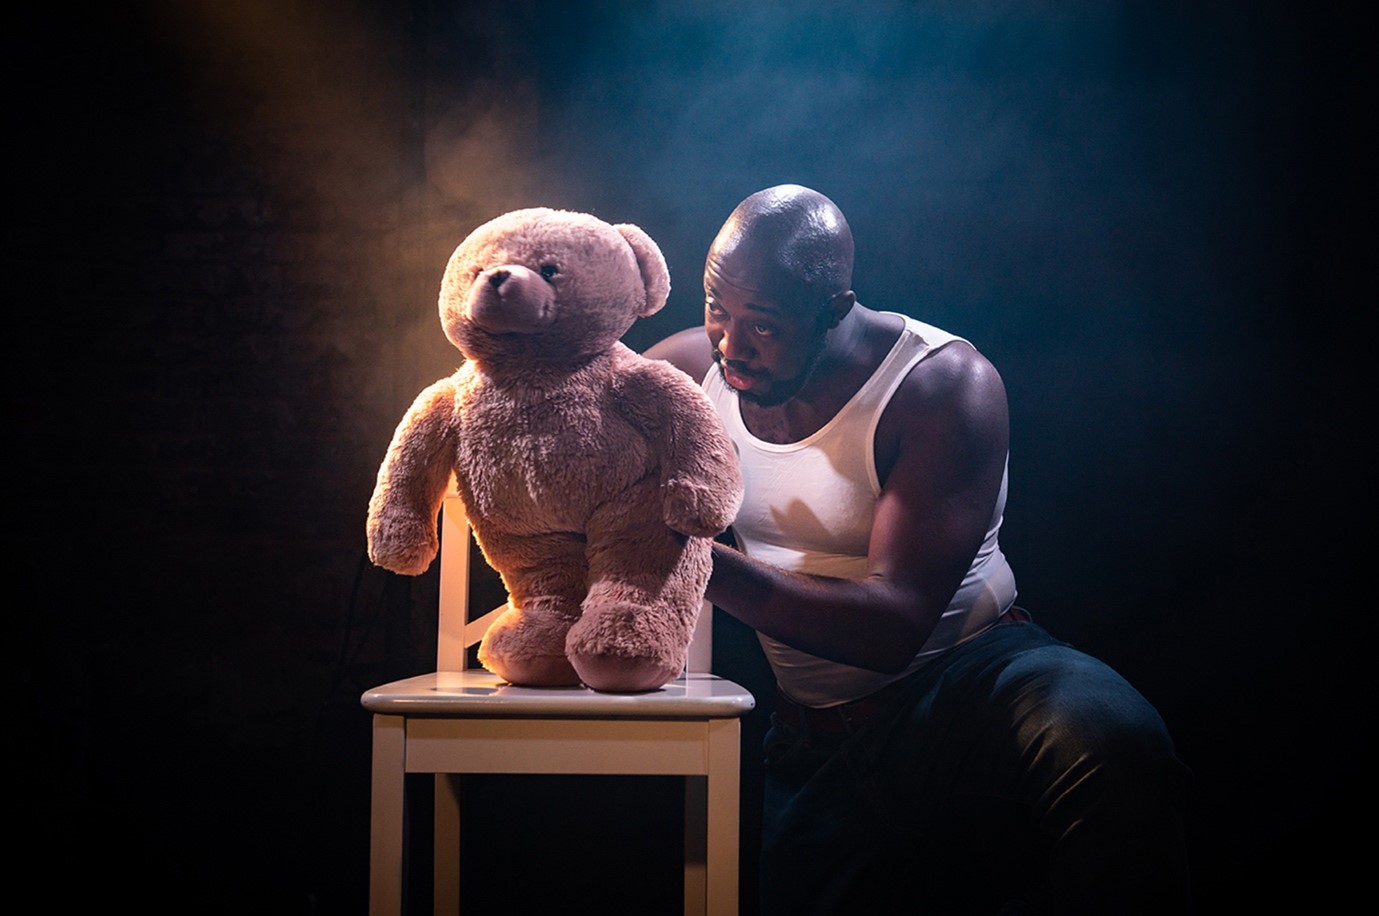 Actor crouches behind a chair with a Teddy bear on, in dramatic stage lighting.